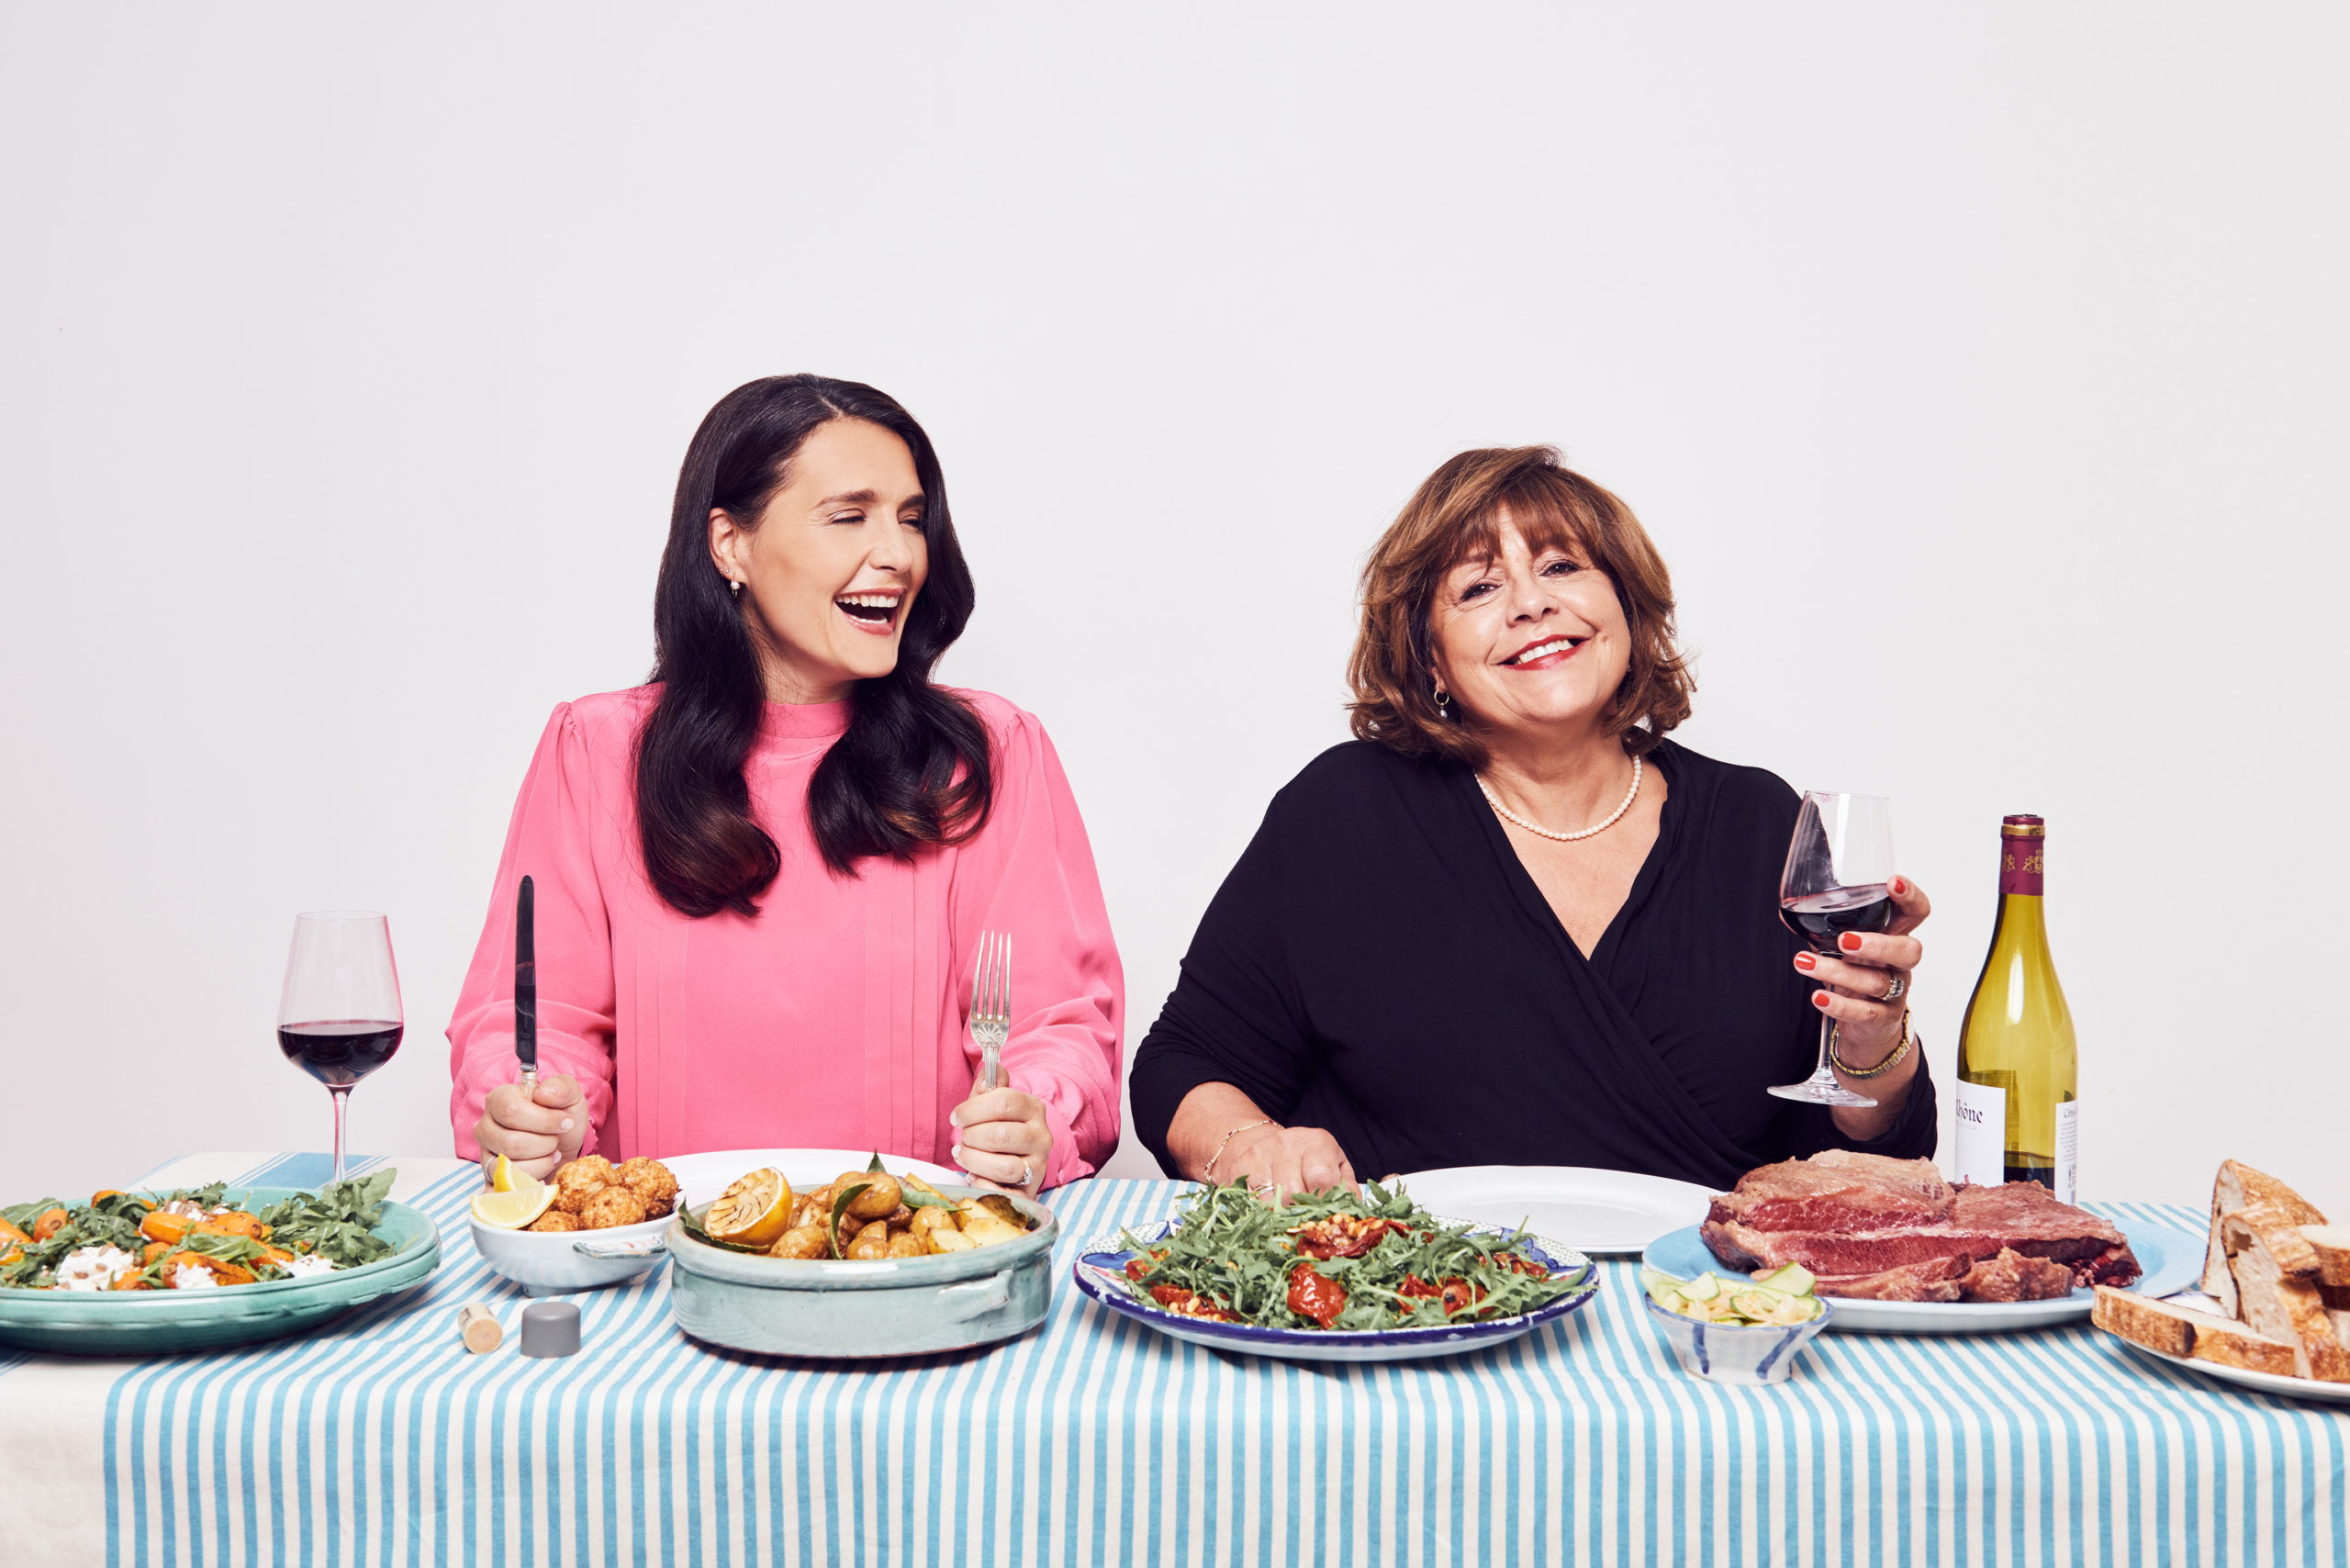 Singer Jessie Ware and her mum Lennie at the dinner table